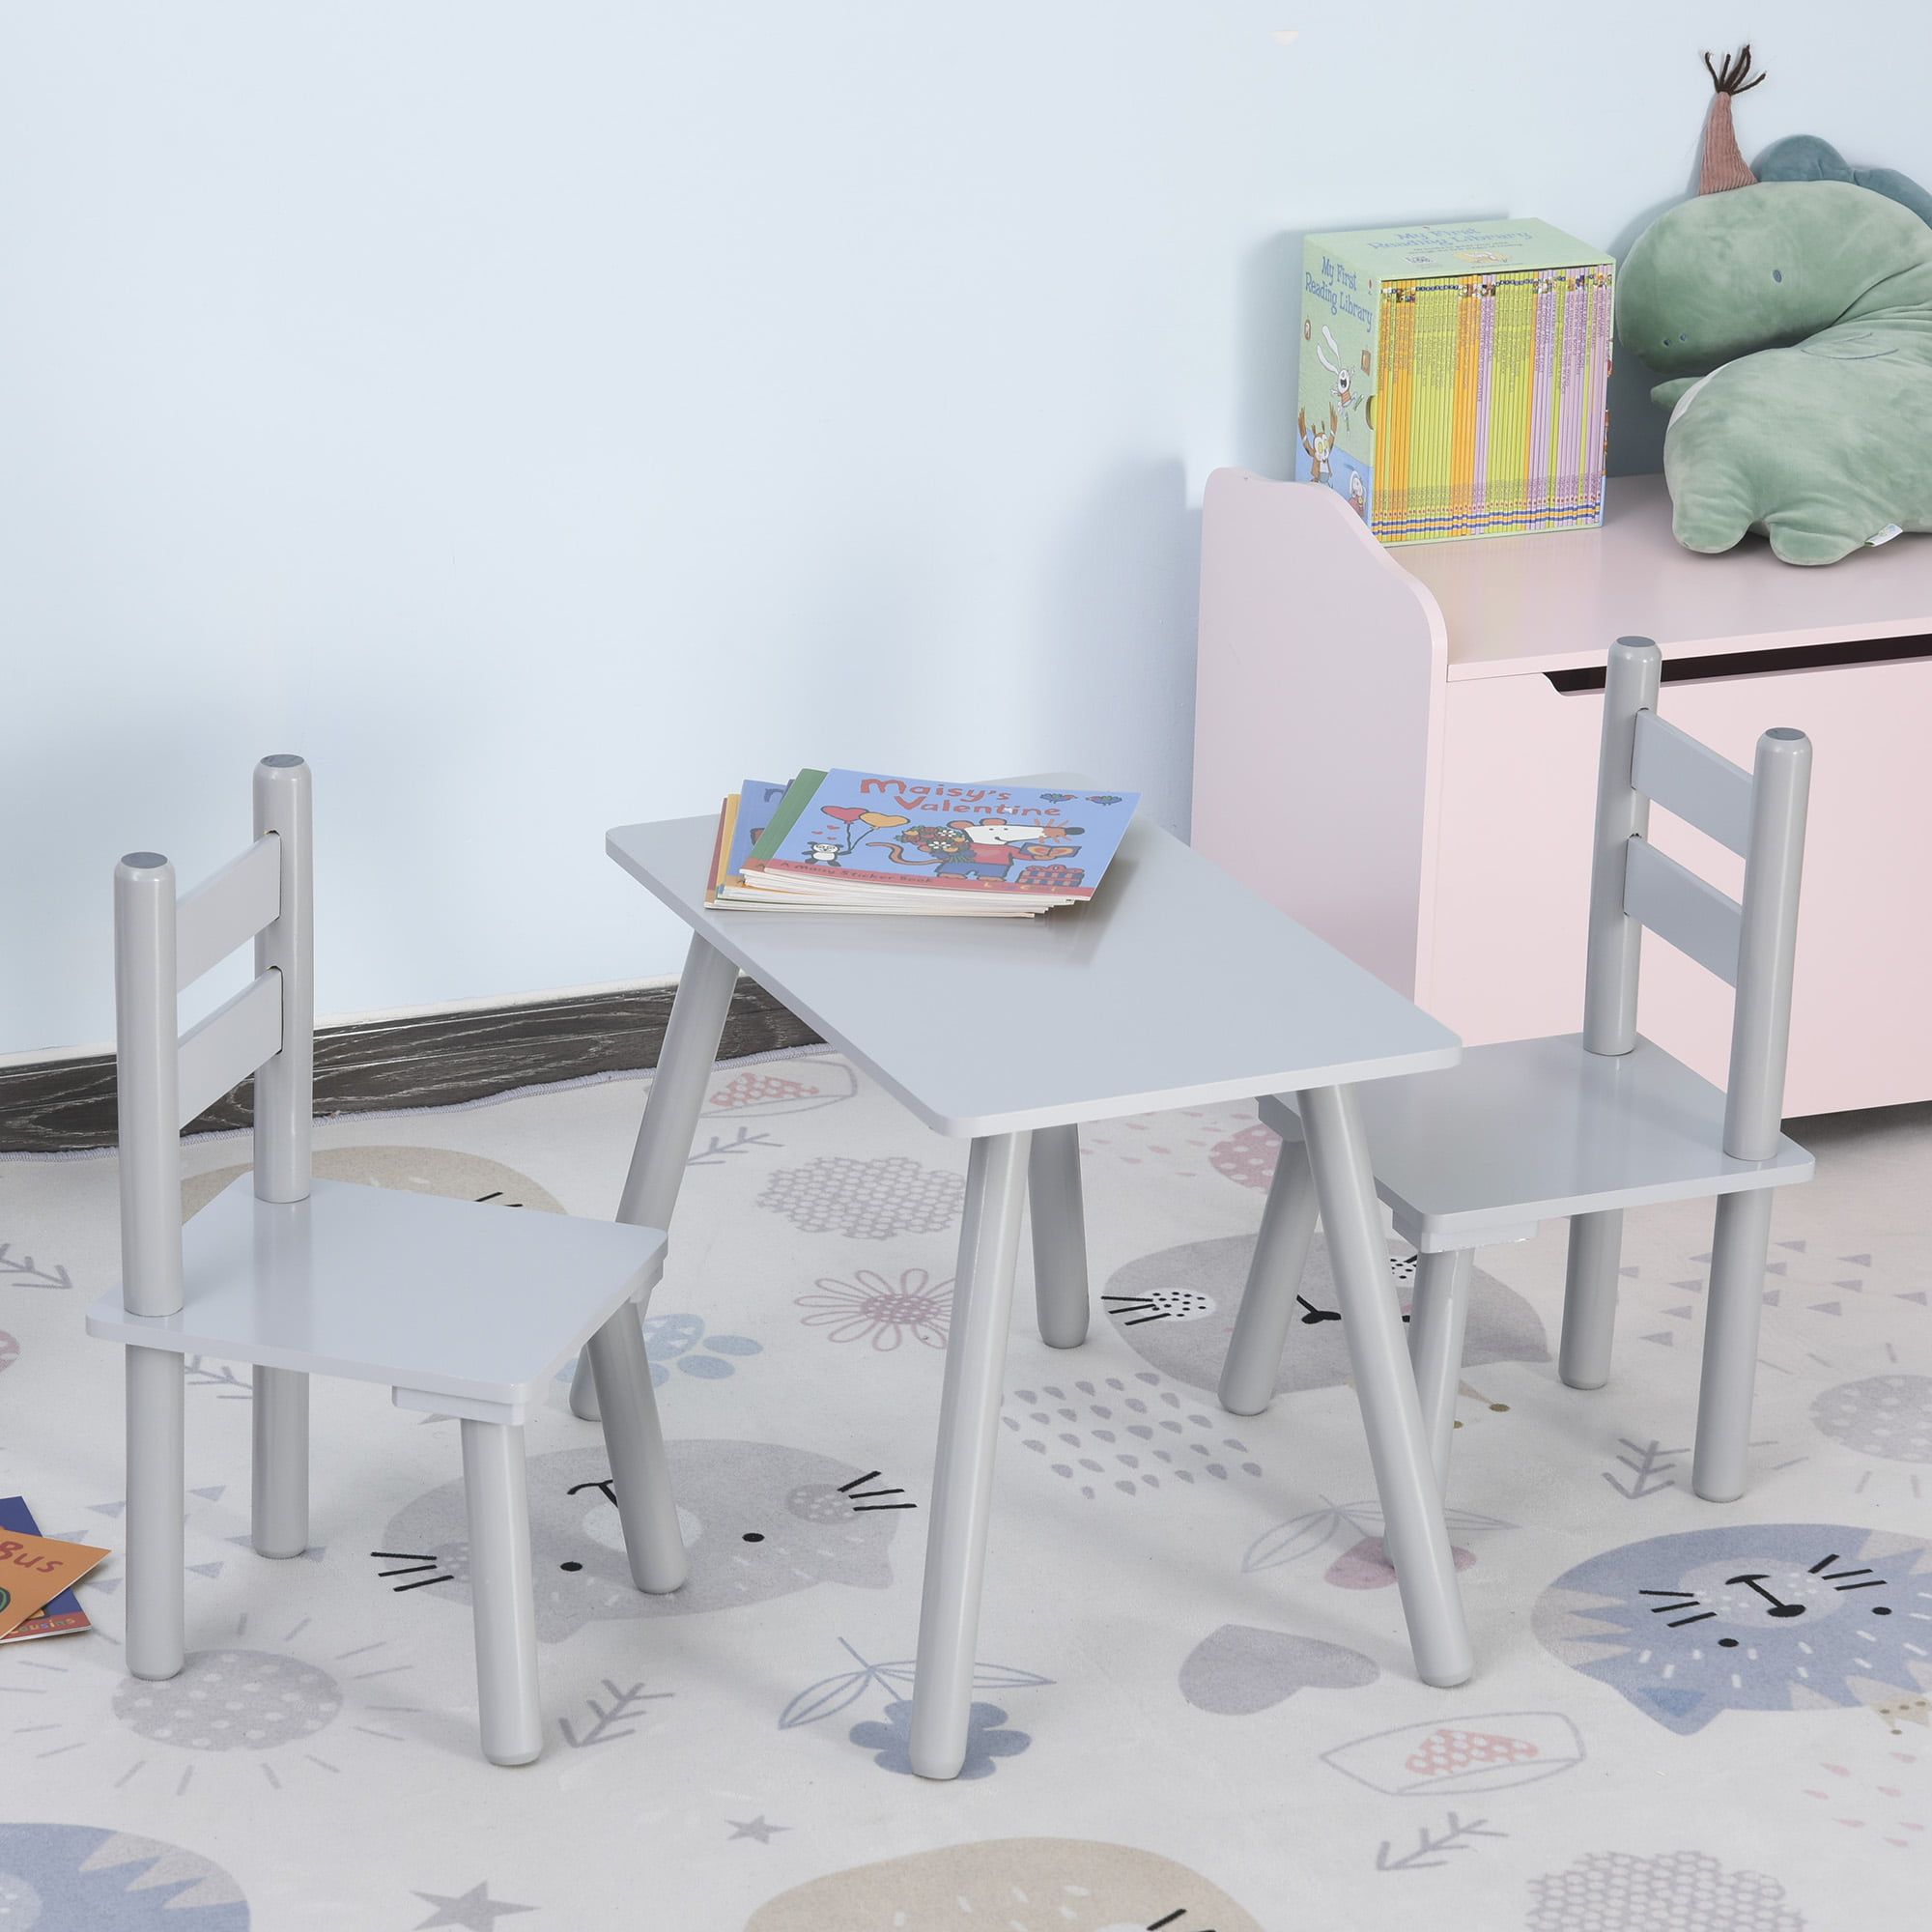 Grey and White Qaba 4-Piece Set Kids Wood Table Chair Bench with Storage Function Toddlers Age 3 Years up